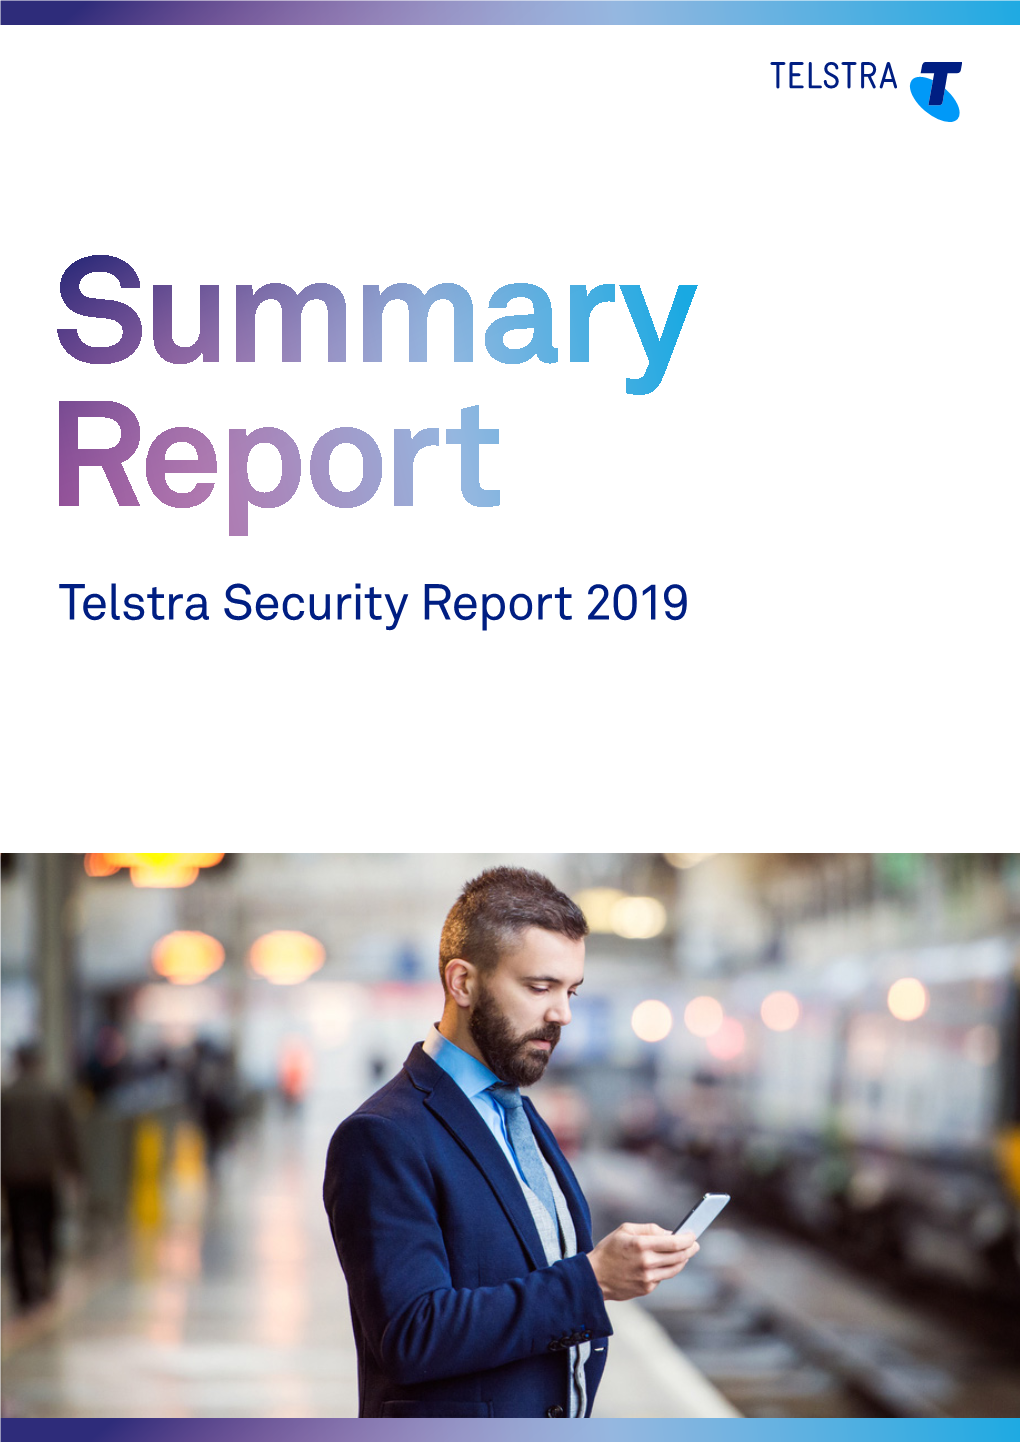 Telstra Security Report 2019 Foreword